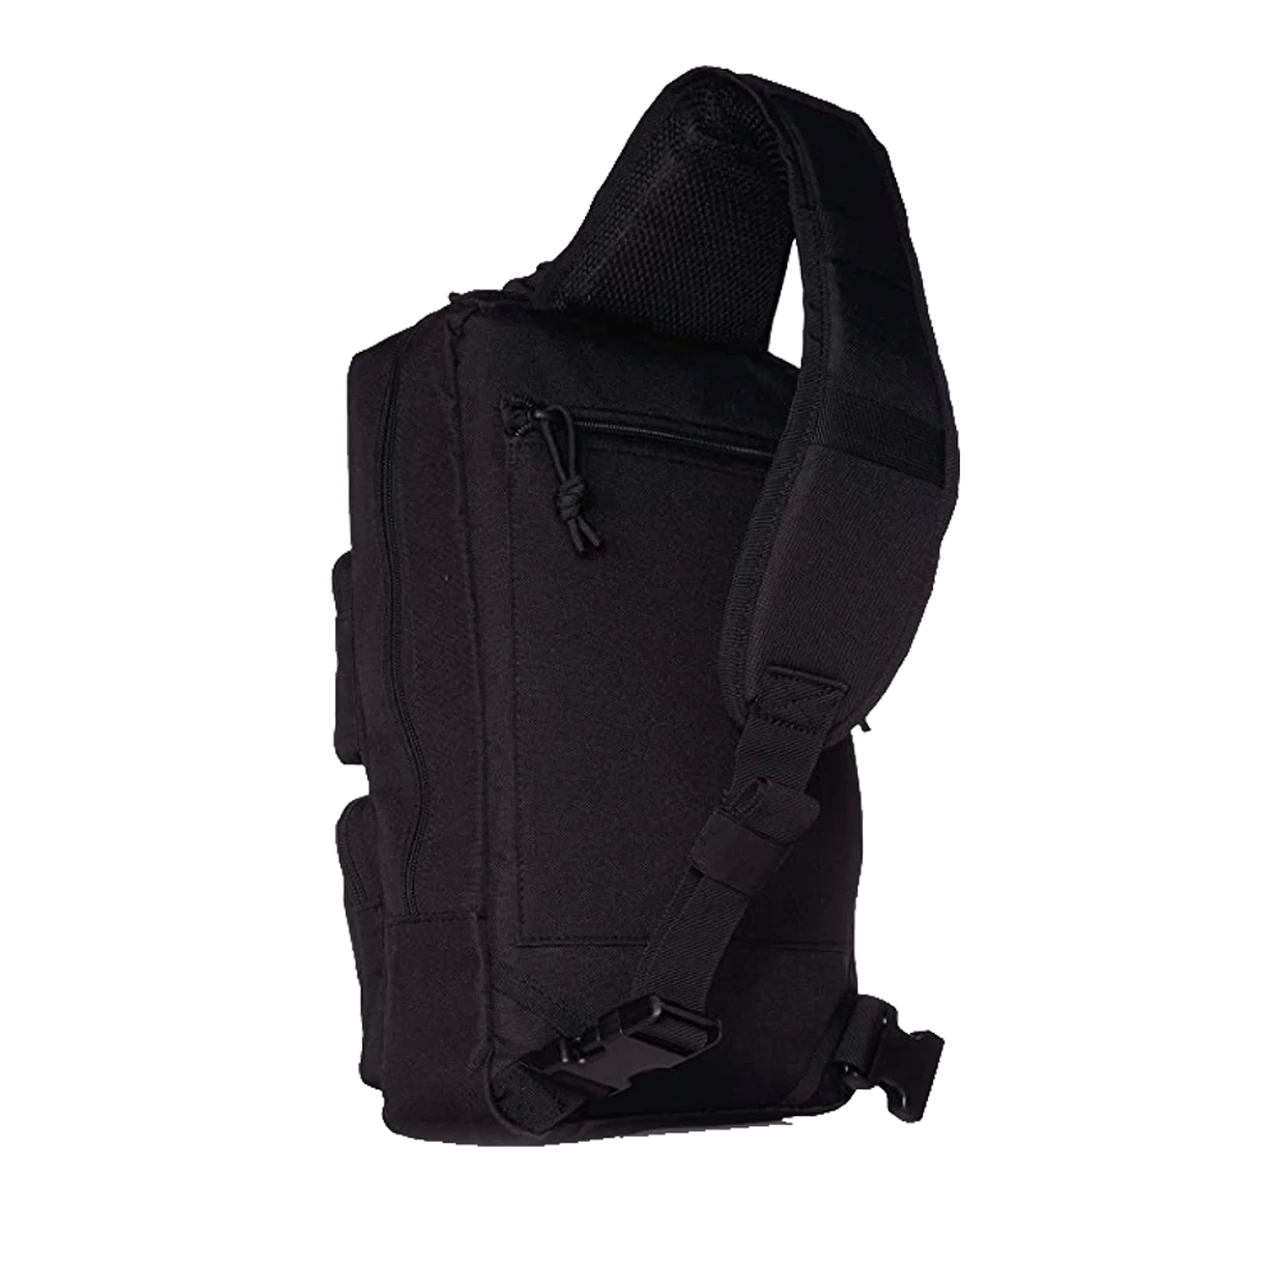 Voodoo Tactical Traveler Day Pack - $29.98 (Free S/H over $100)